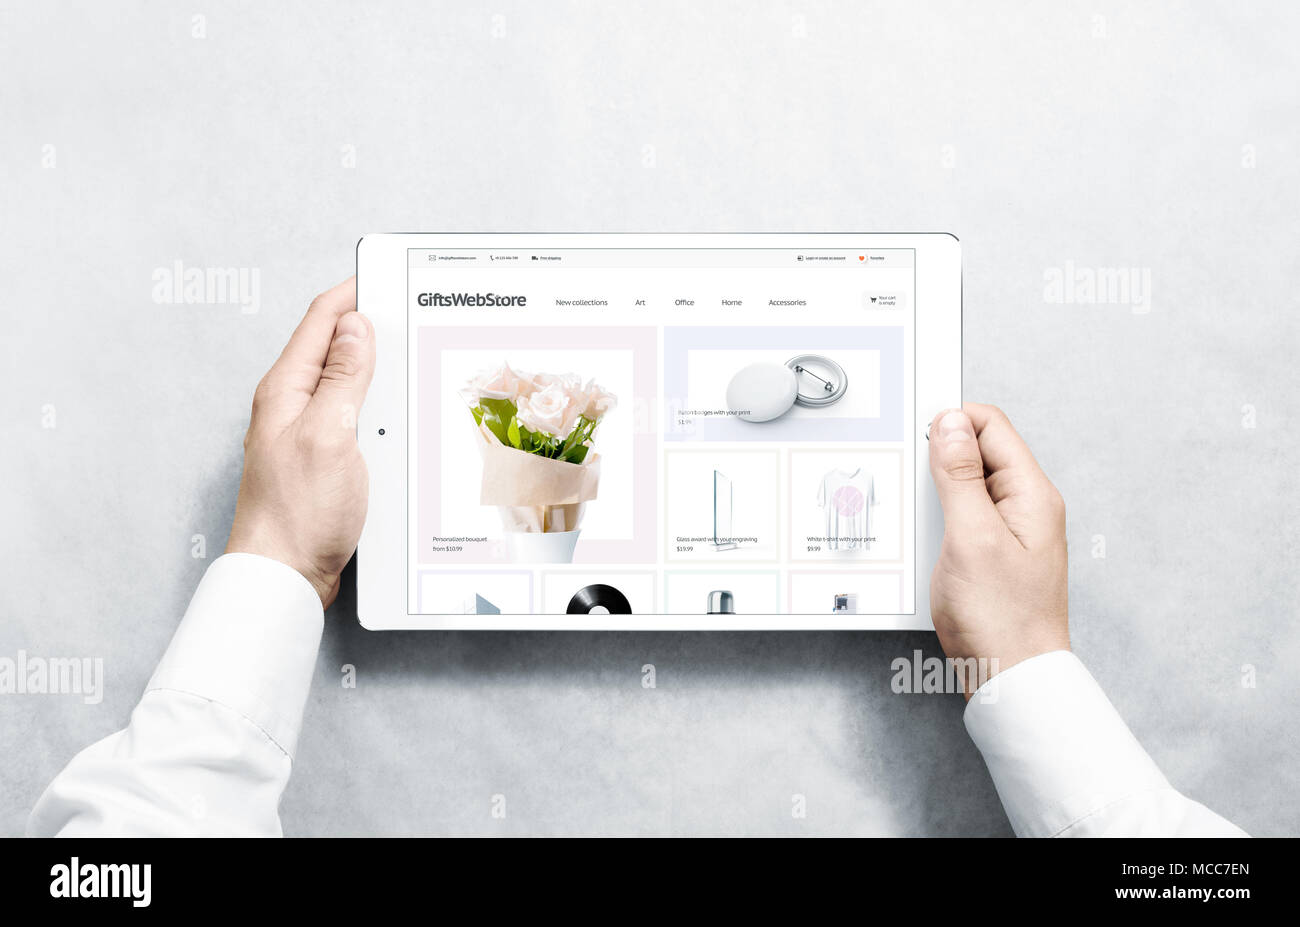 Hands holding tablet with gifts webstore mock up on screen, isolated. Clothing web page interface mockup. Internet website online template on the devi Stock Photo